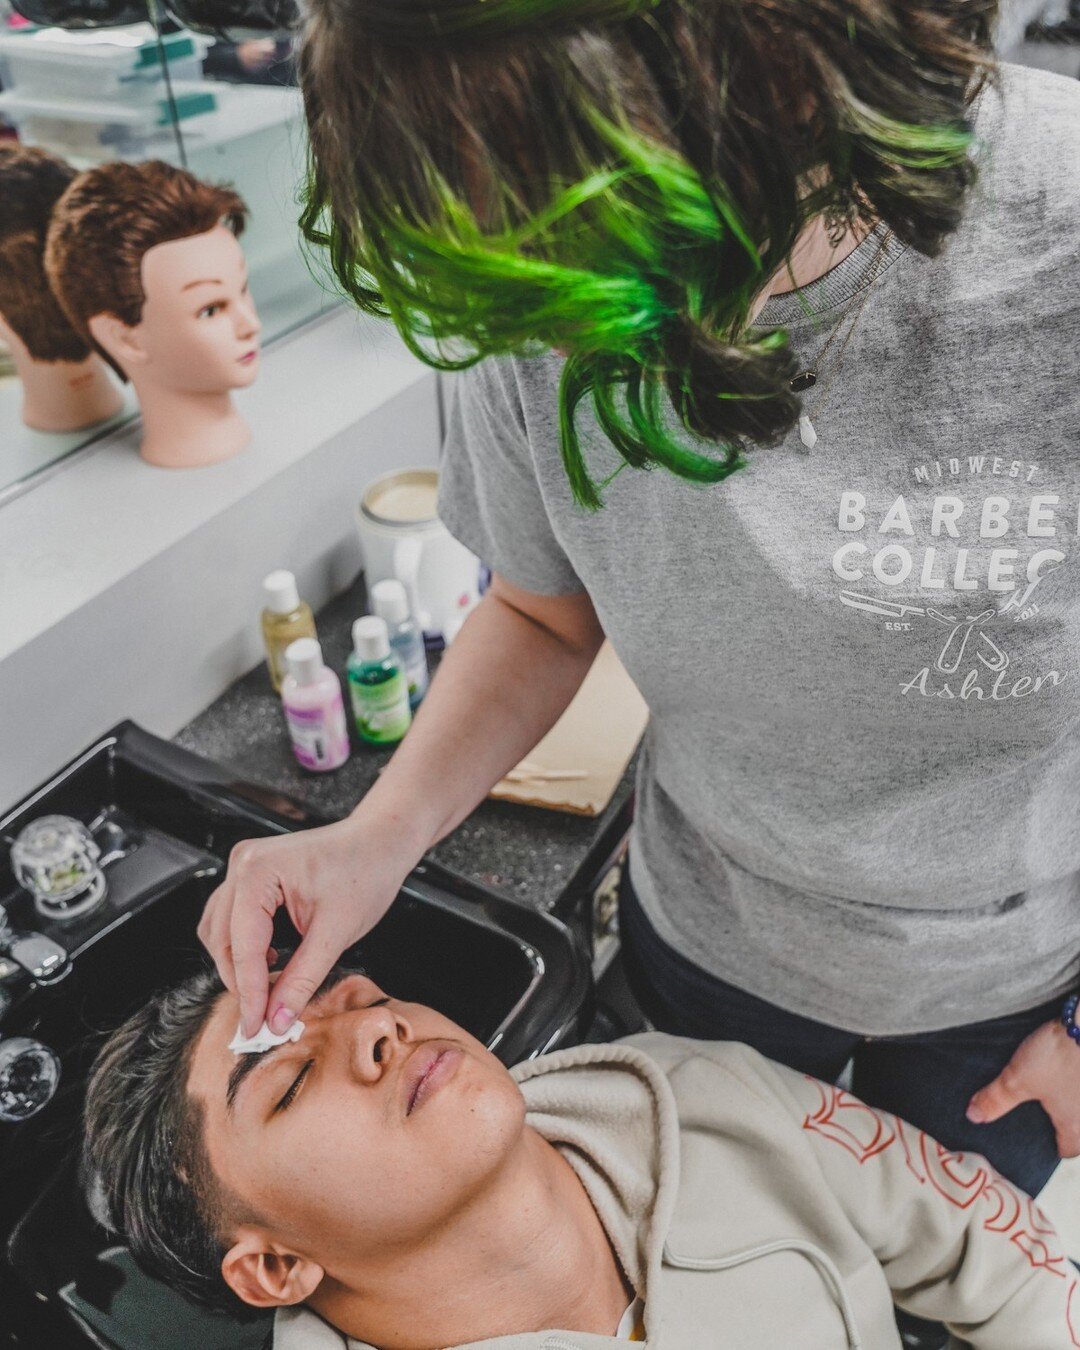 Ashten practicing brows! Proper preparation prevents poor performance. 😉 

Have you heard about our crossover program (INDUSTRY RELATED: BARBERING - 500)? Spend 500 hours with us and earn your barber license! 
Tap the link in the bio for more info.
